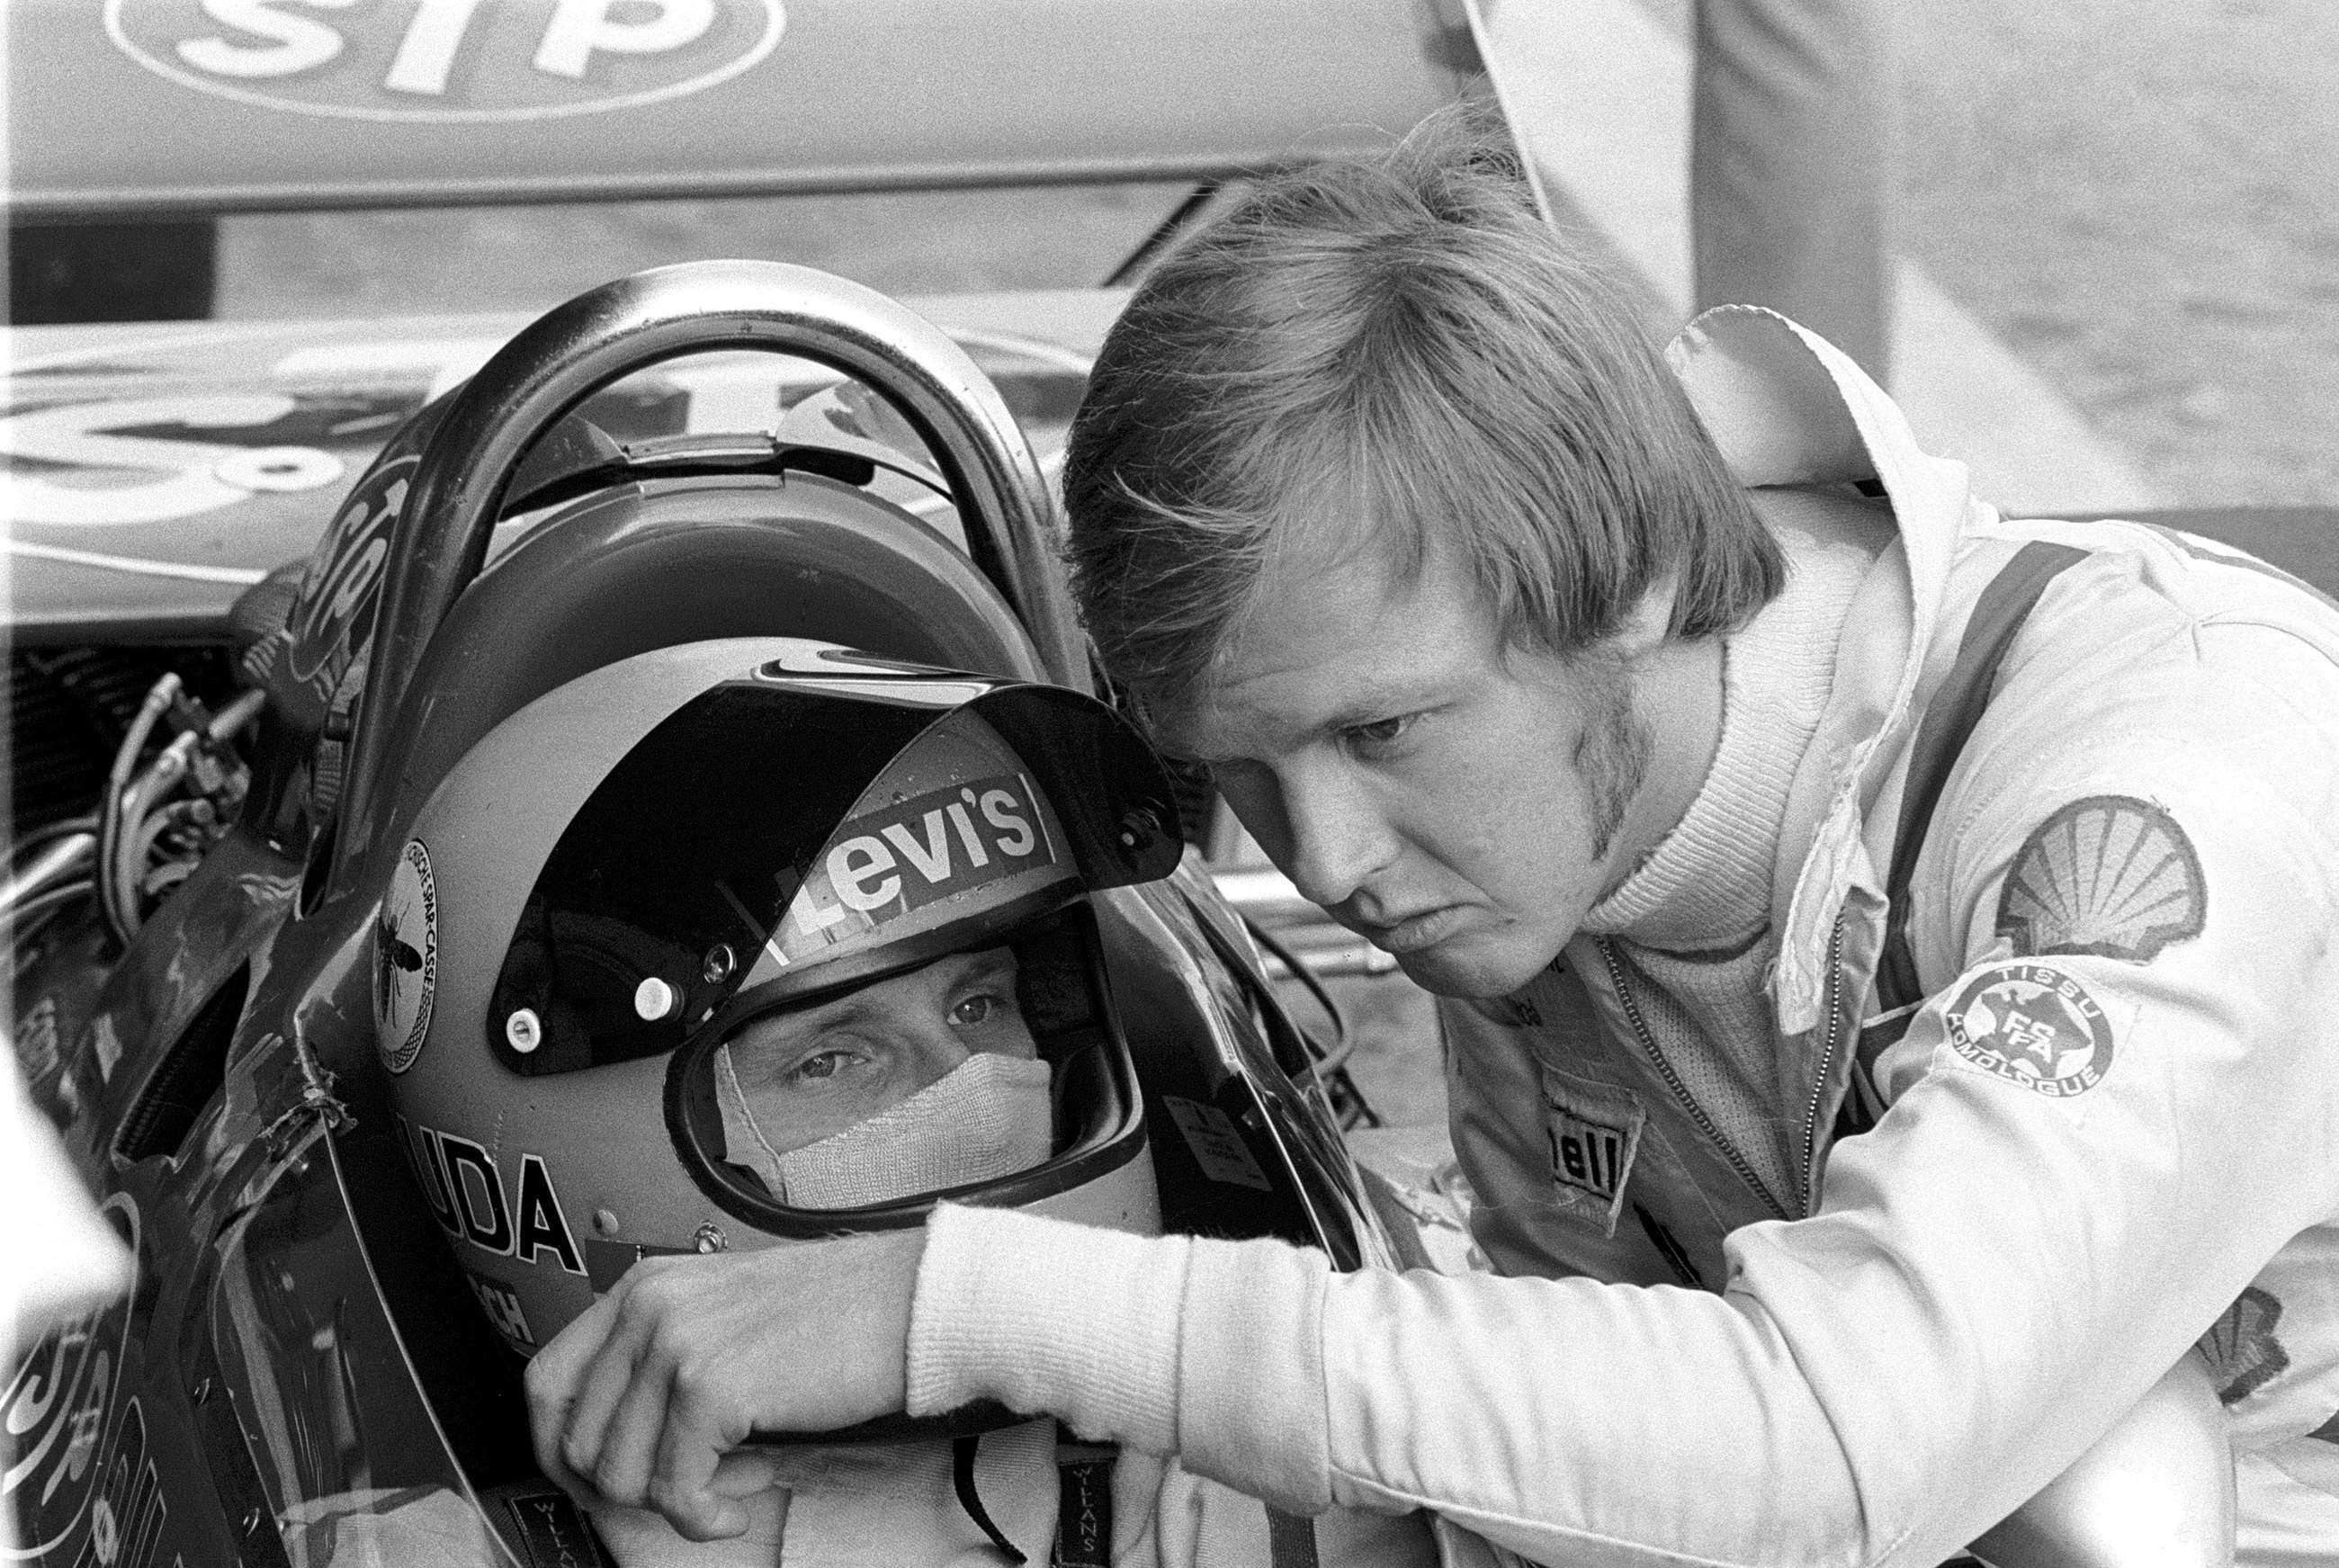 Lauda making his Formula 1 debut at the 1971 Austrian Grand Prix, seen here with team-mate Ronnie Peterson.